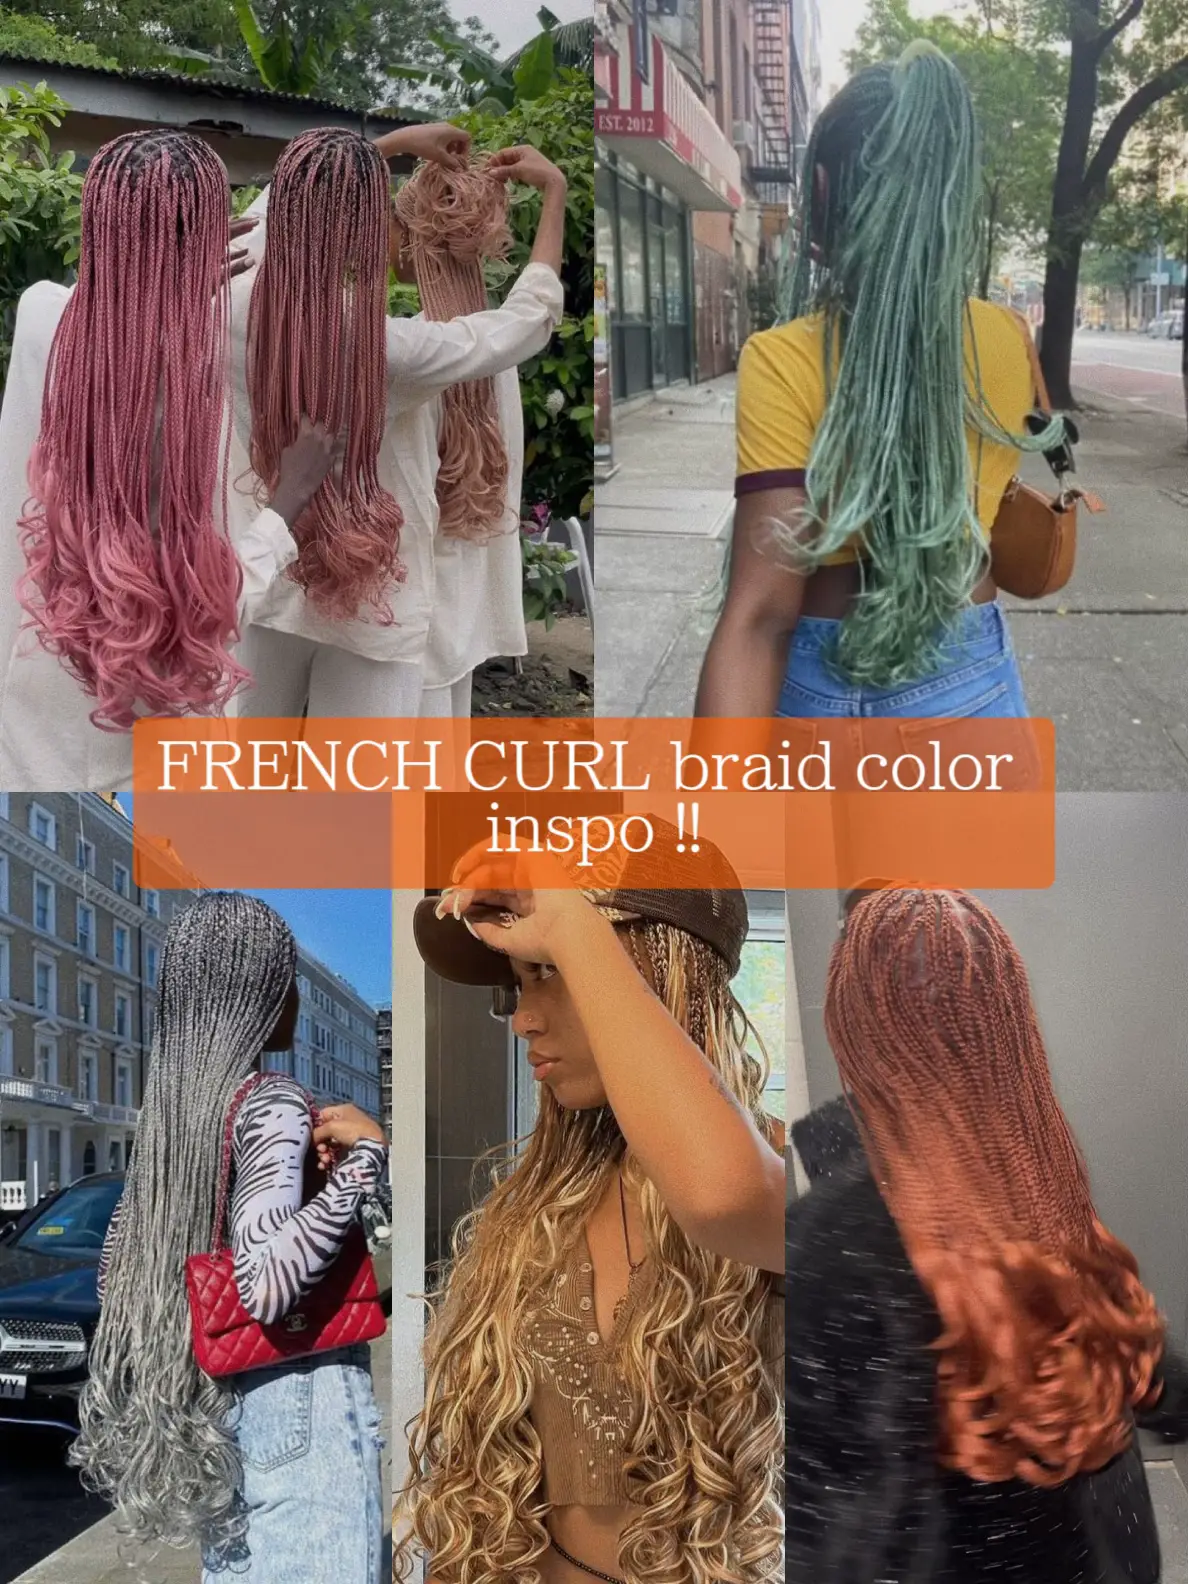 French curl braids ✨, Gallery posted by Celeumwiza